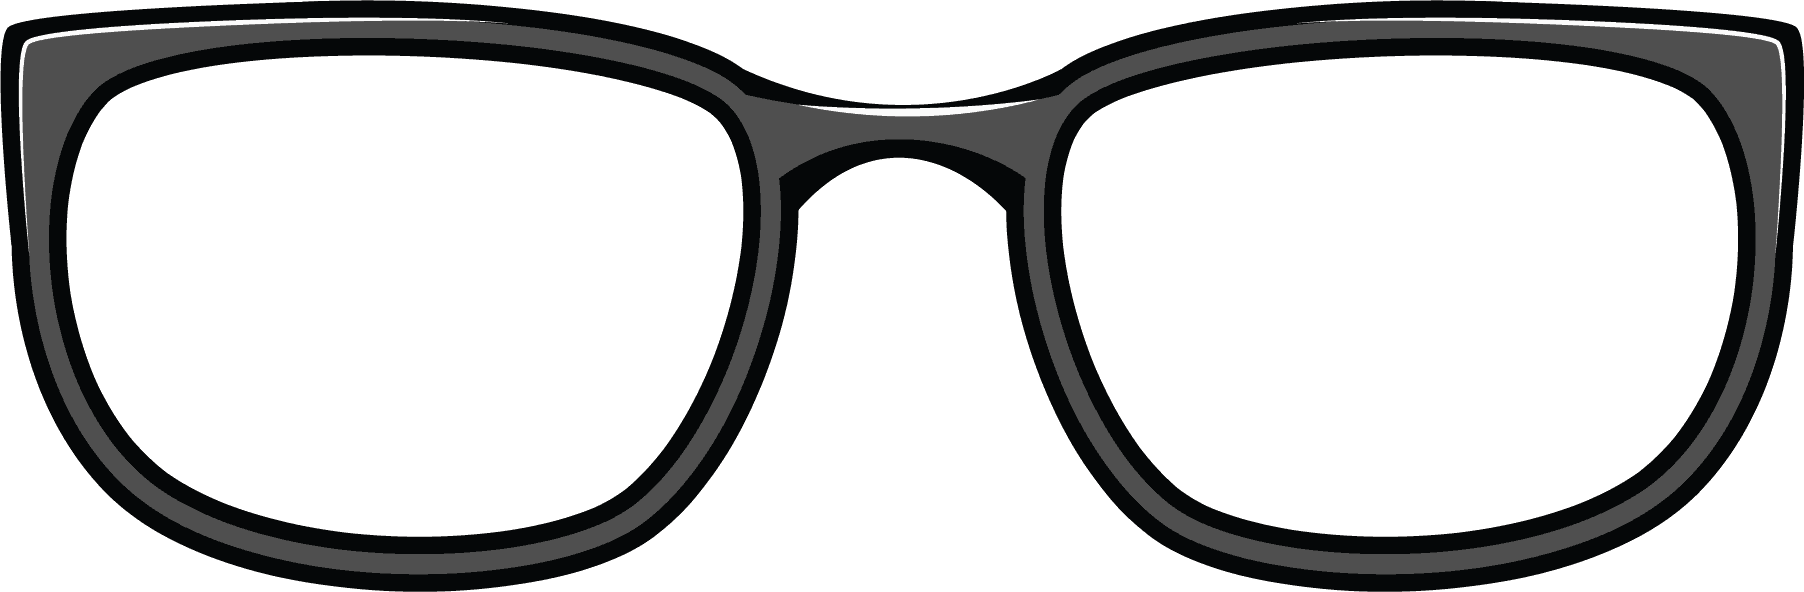 Eyes with glasses clipart